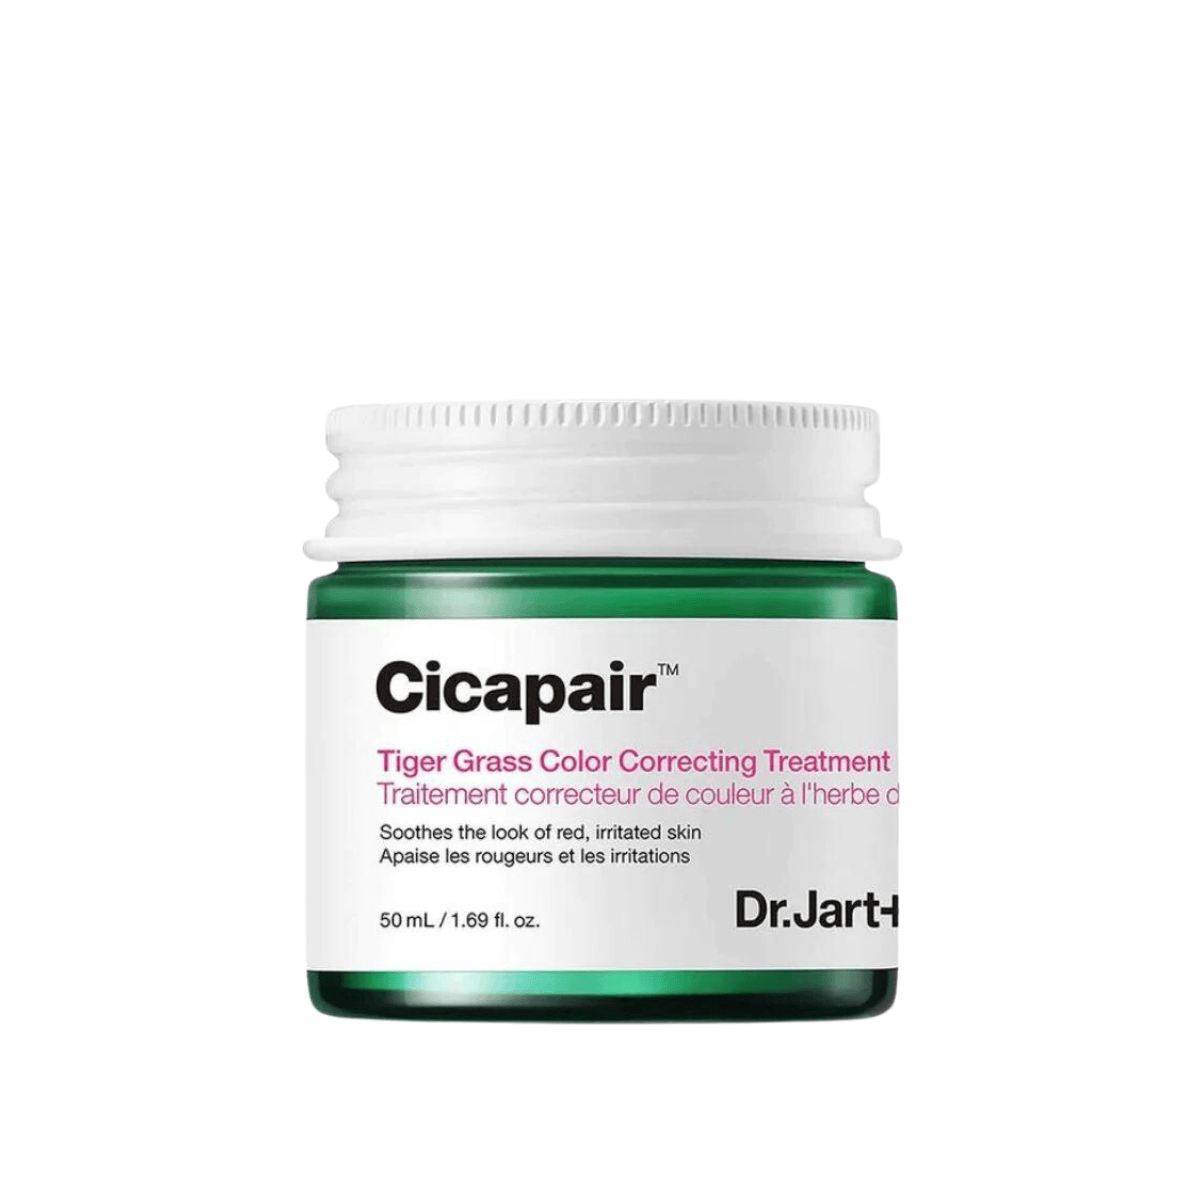 Cicapair Tiger Grass Color Correcting Treatment - 30 ml